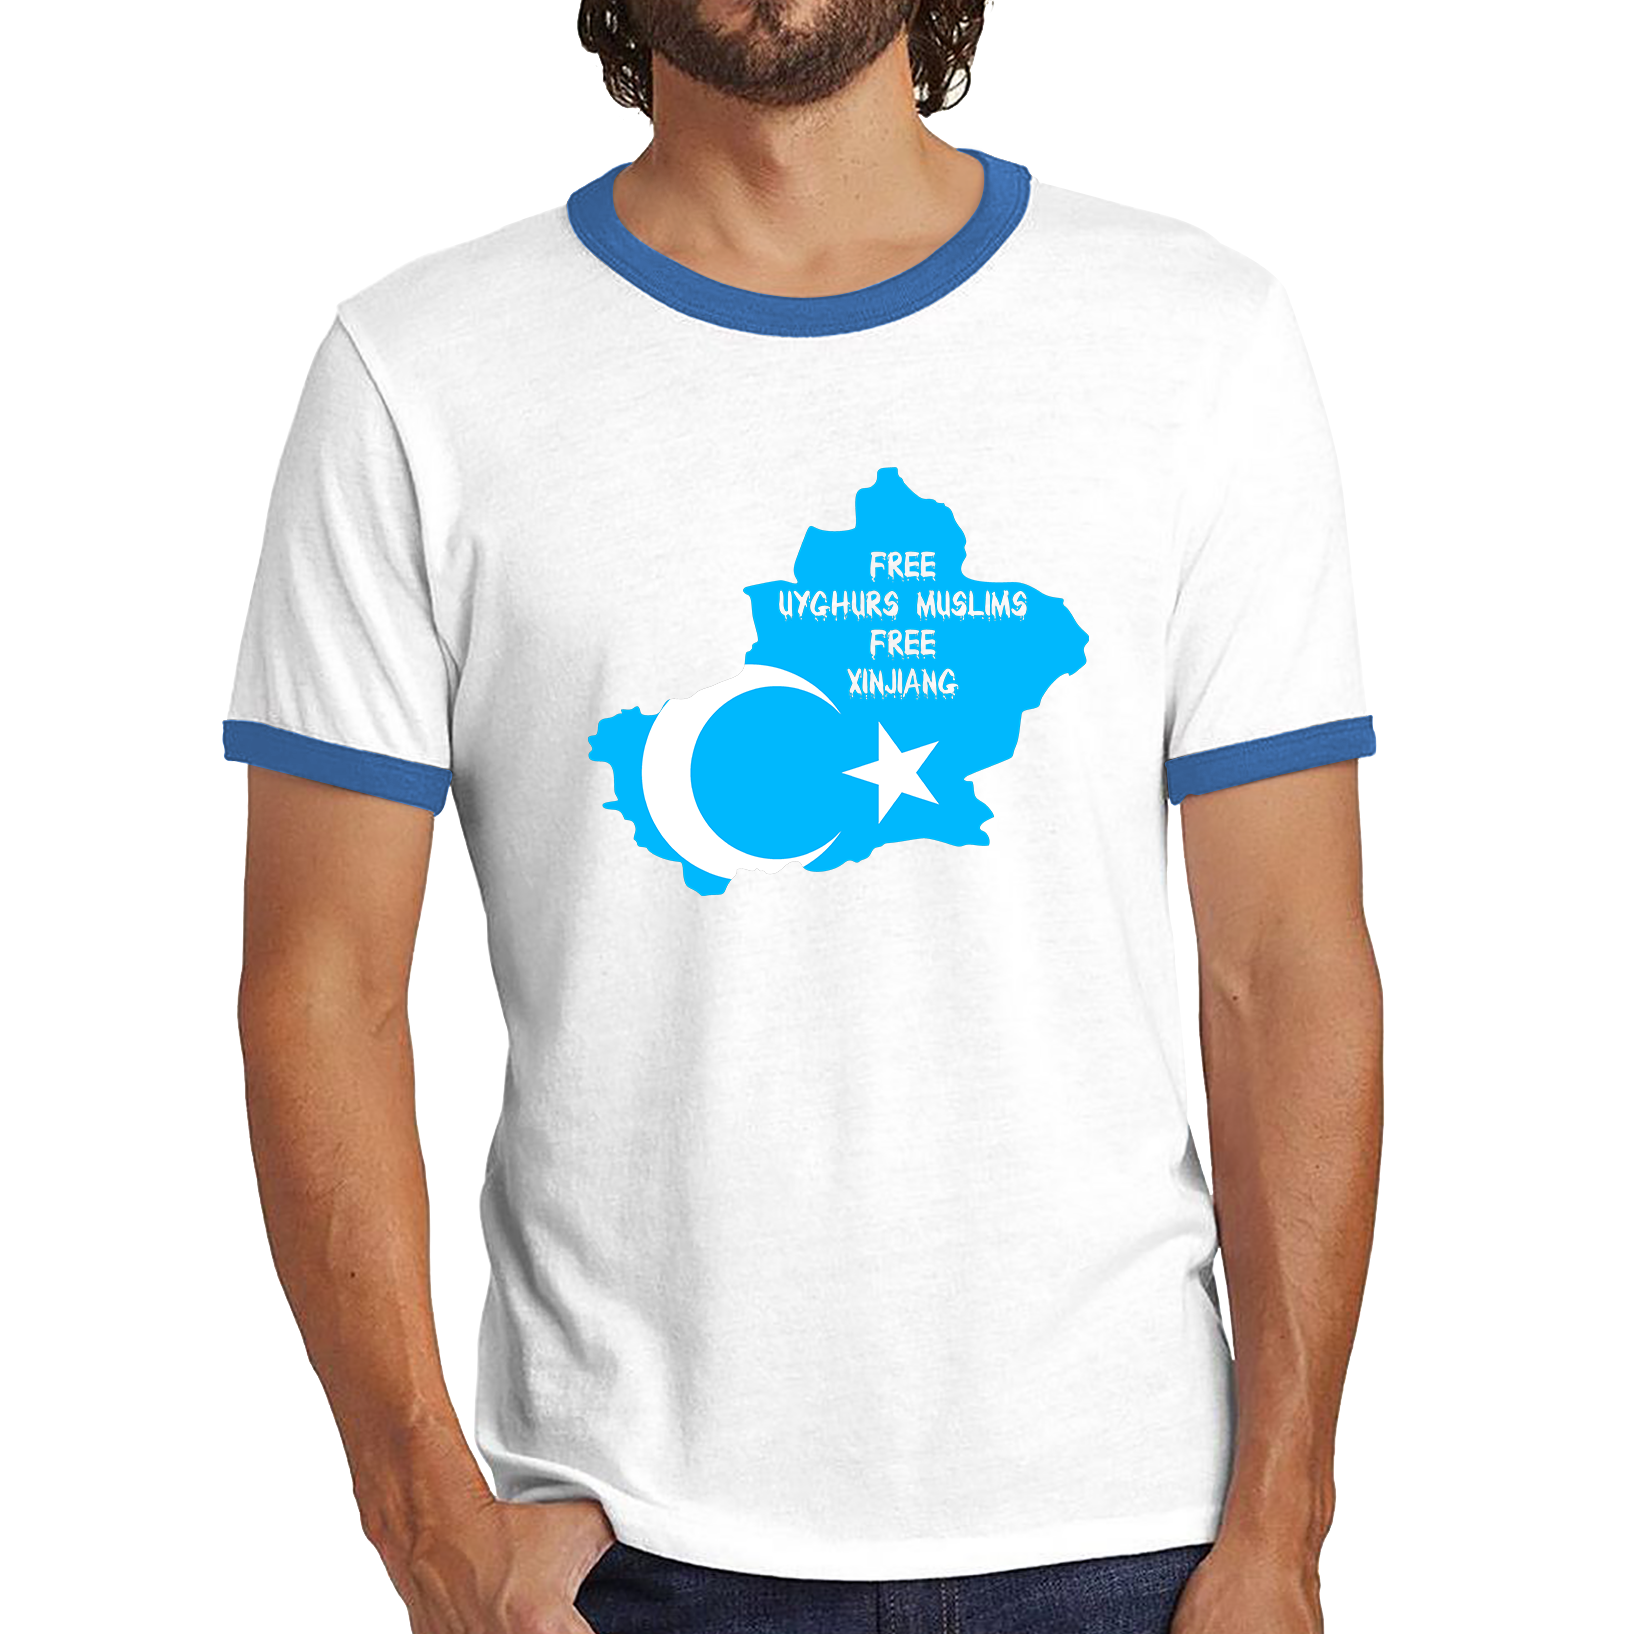 Free Uyghurs Muslims Free Xinjiang Freedom For Uygurs Uigurs East Turkestan Support And Freedom Ringer T Shirt